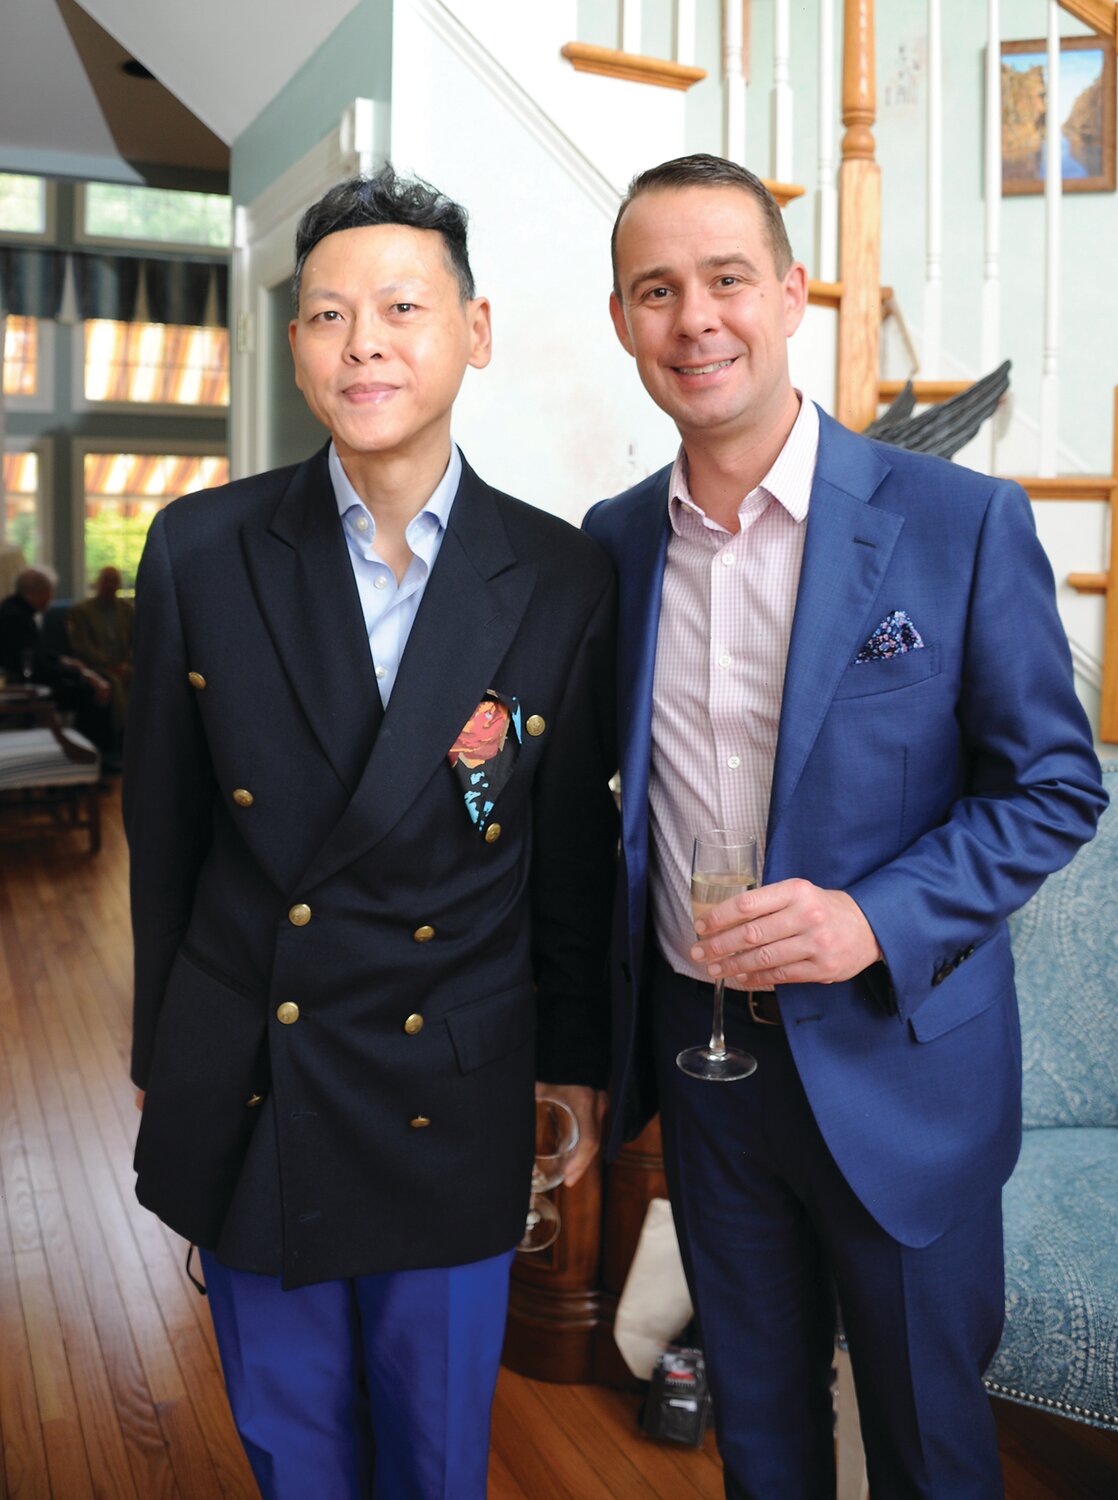 Karl Fong, left, poses with Scott Guzielek who, this week, was named the new president of the Academy of Vocal Arts.